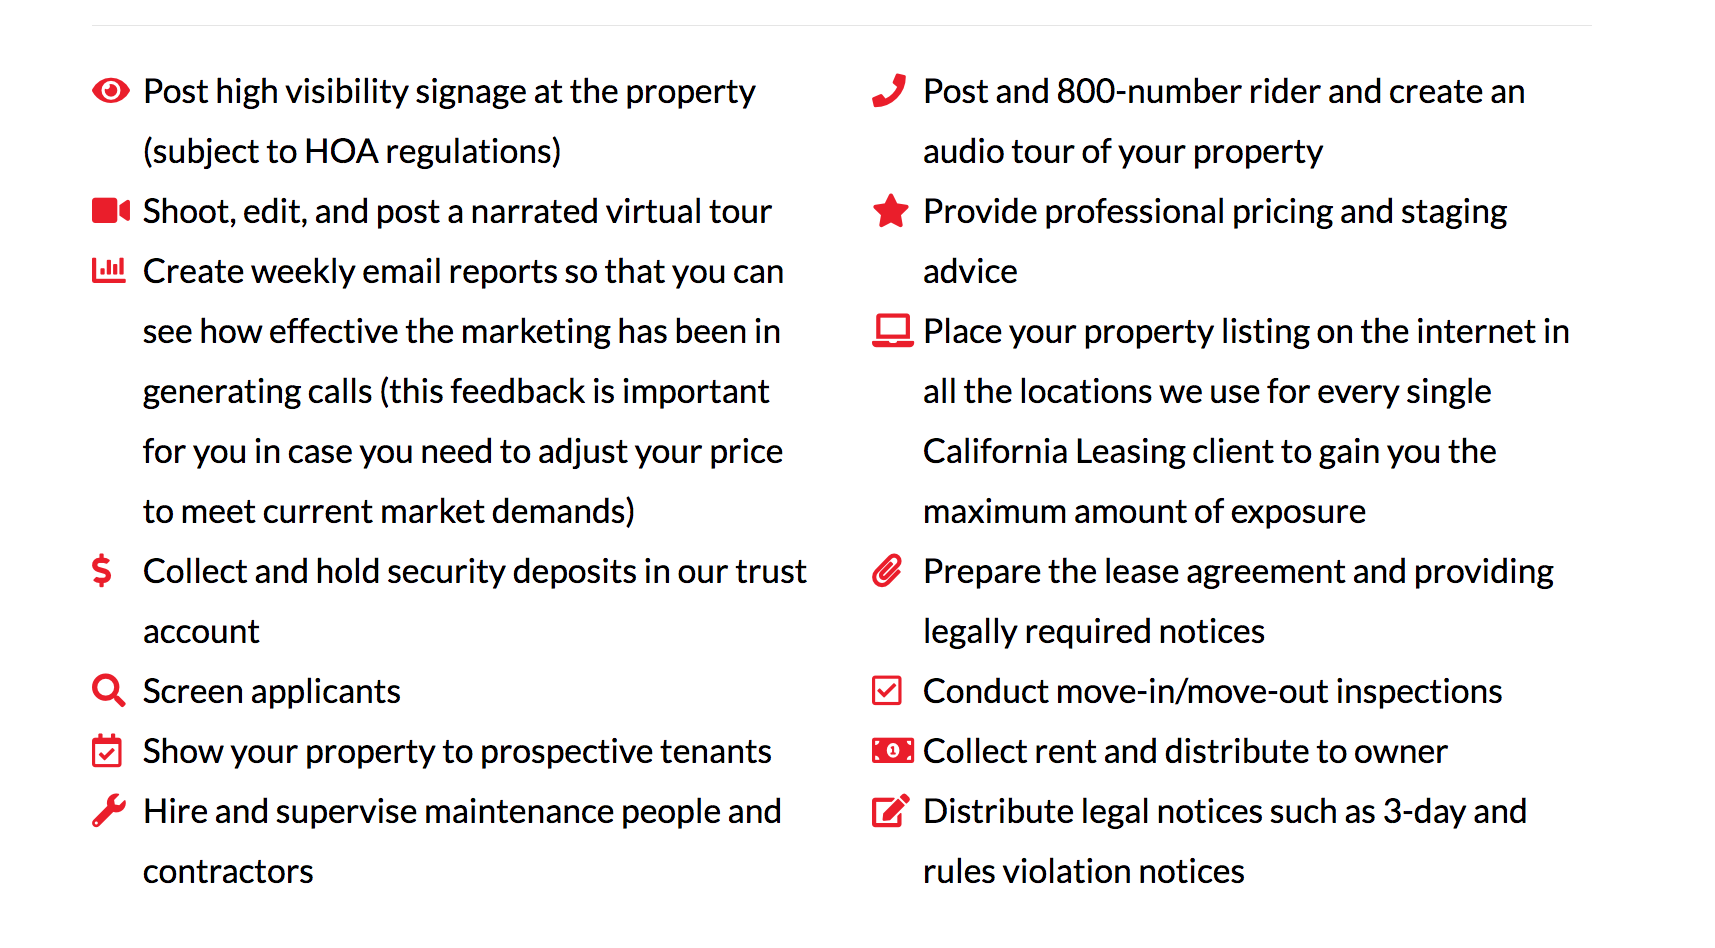 Full Property Management Service with California Leasing 